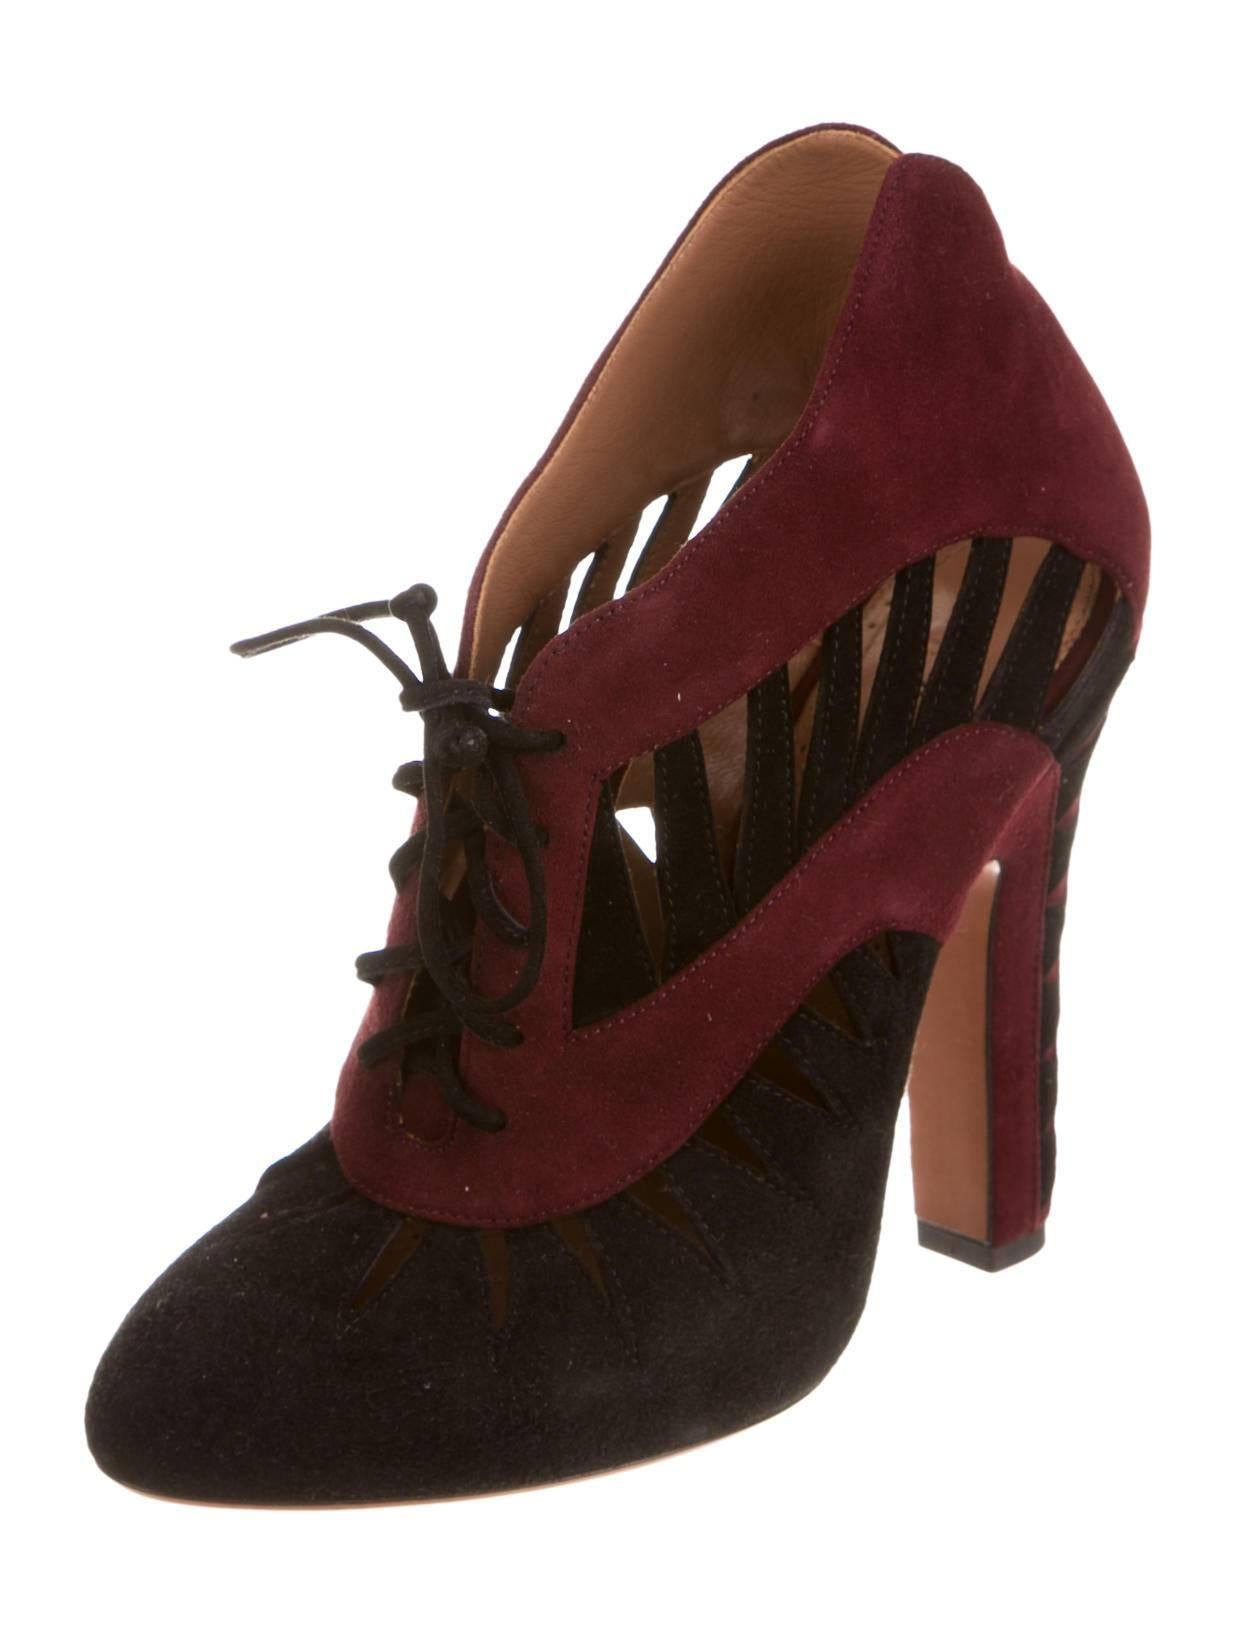 CURATOR'S NOTES

Alaia NEW & SOLD OUT Burgundy Black SuedeCut Out Lace Up Ankle Booties in Box  

Size IT 36
Suede
Lace-up closure
Made in Italy
Heel height 4.75"
Includes original Alaïa box